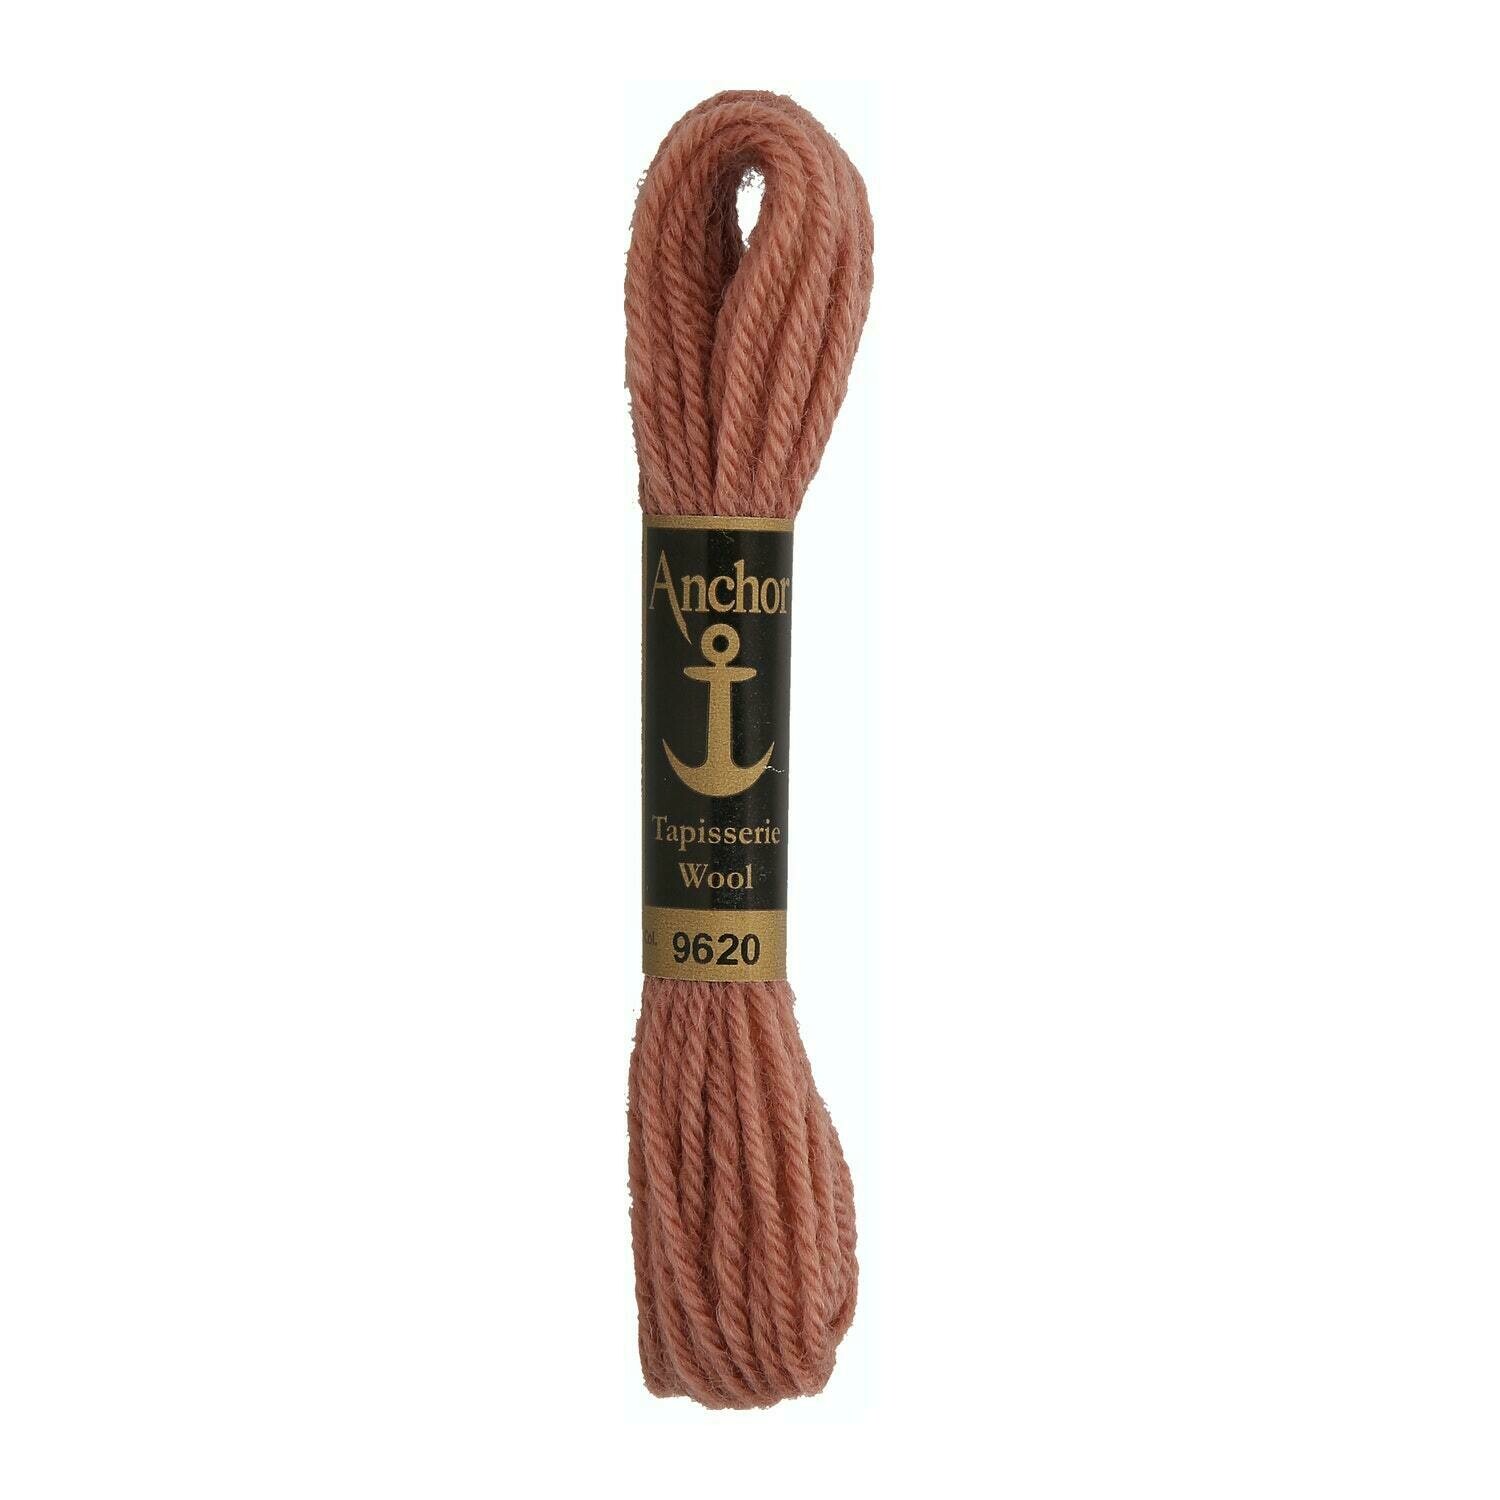 Anchor Tapisserie Wool #09620